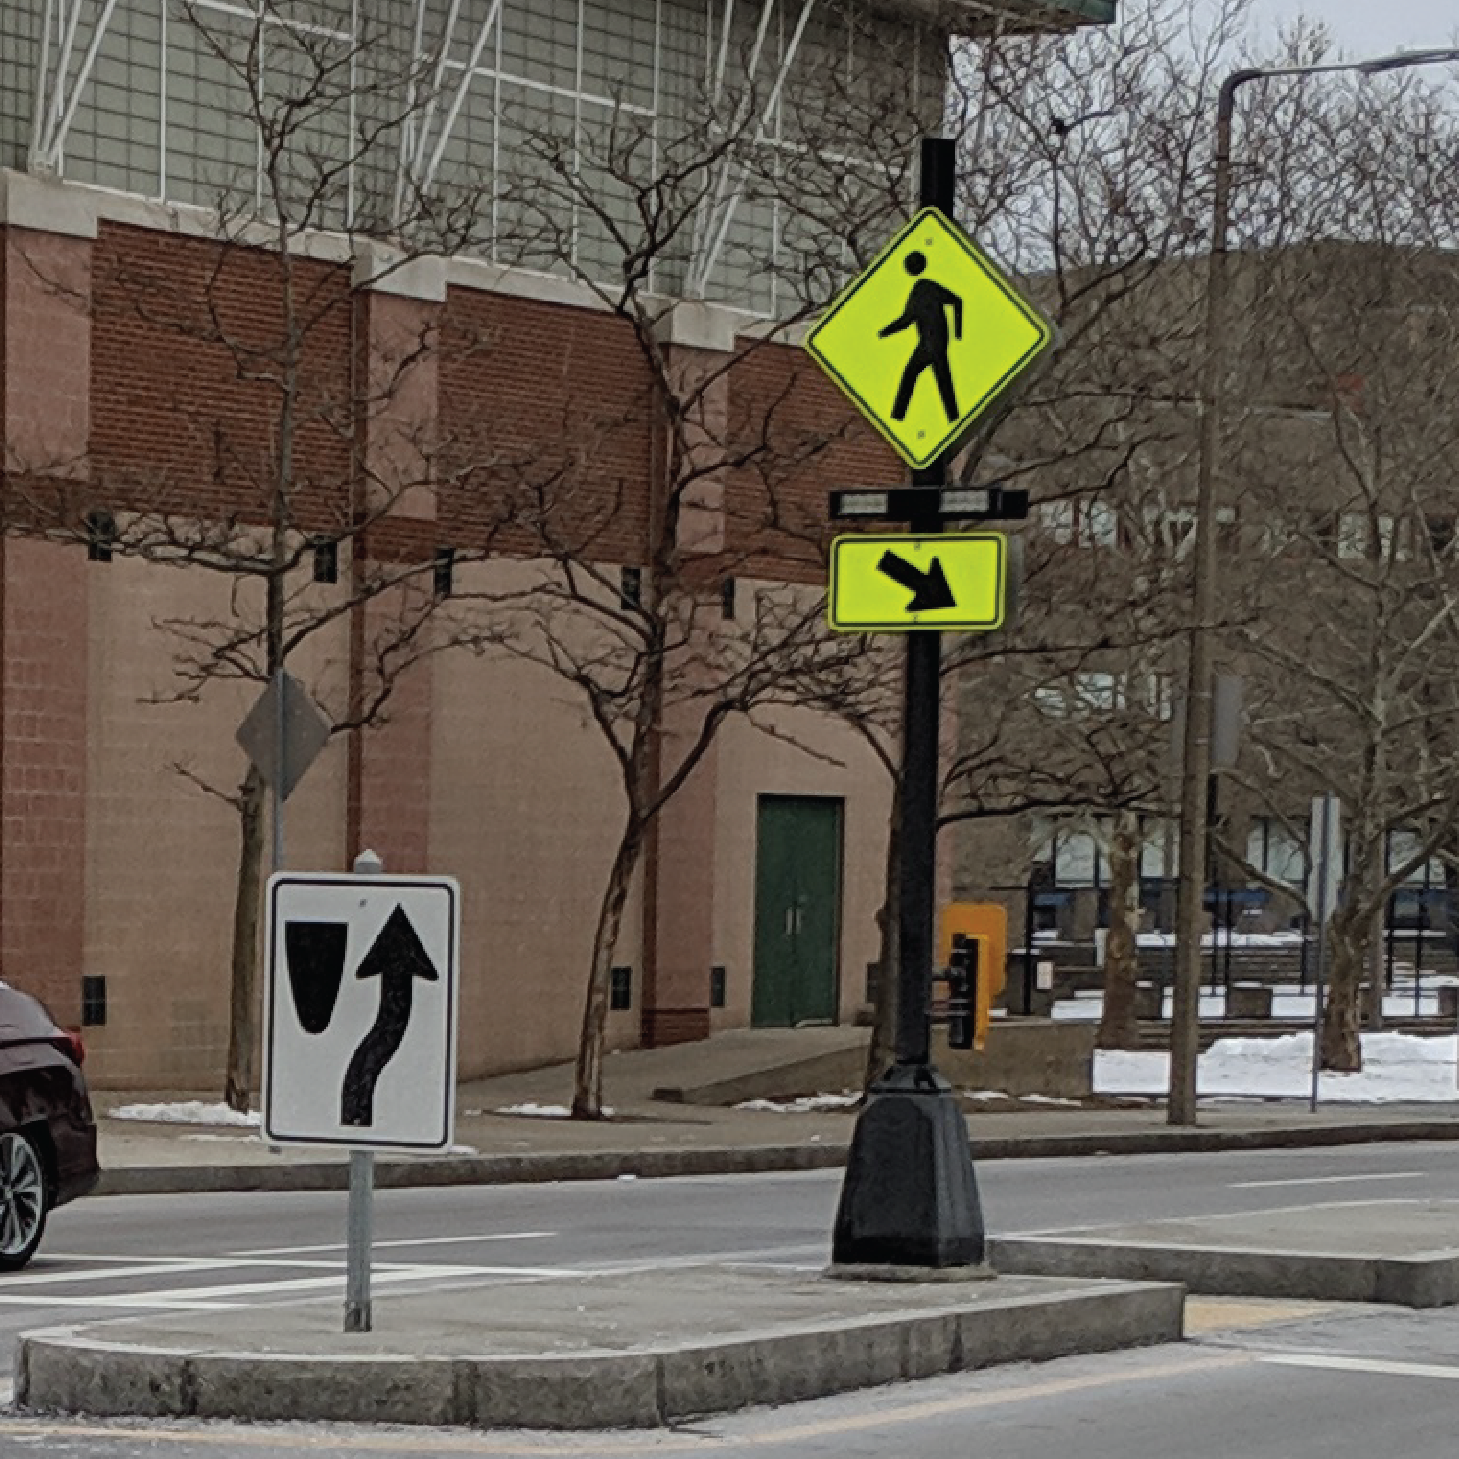 A rapid flashing beacon is installed on a concrete pedestrian crossing island. The beacon is not lit, but you can see the bright yellow sign with a black pedestrian icon and the two rectangular lights.